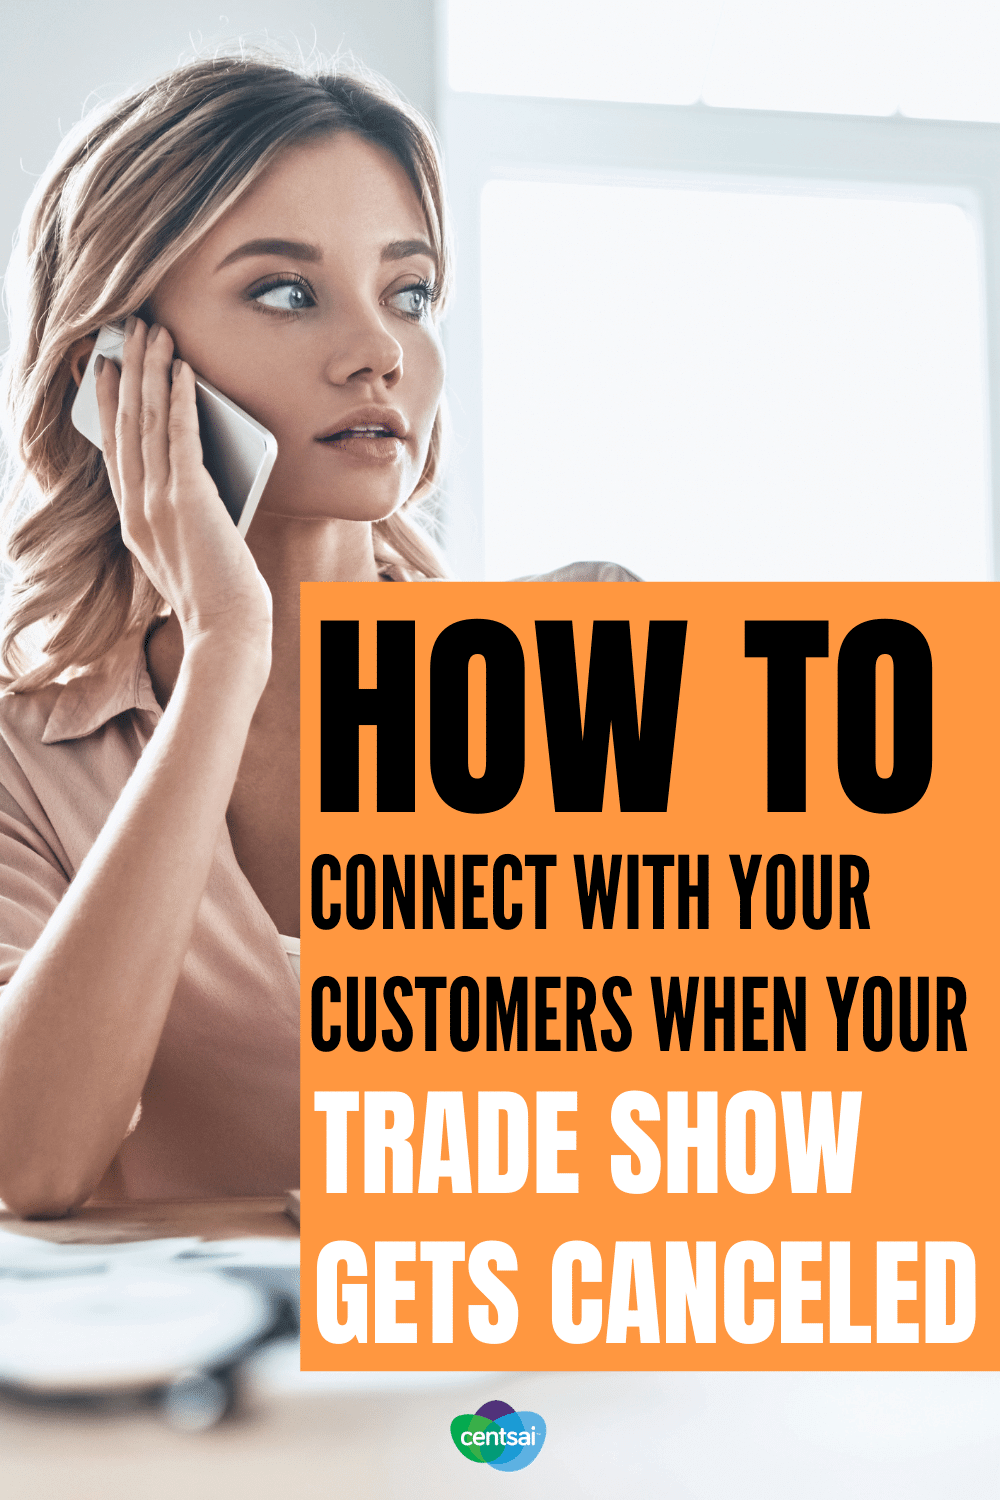 If your 2021 trade show is canceled, there are still ways many ways to network in a digital space. Check out these six recommendations. #CentSai #entrepreneurtips #entrepreneurideas #peertopeer #peertopeernetwork